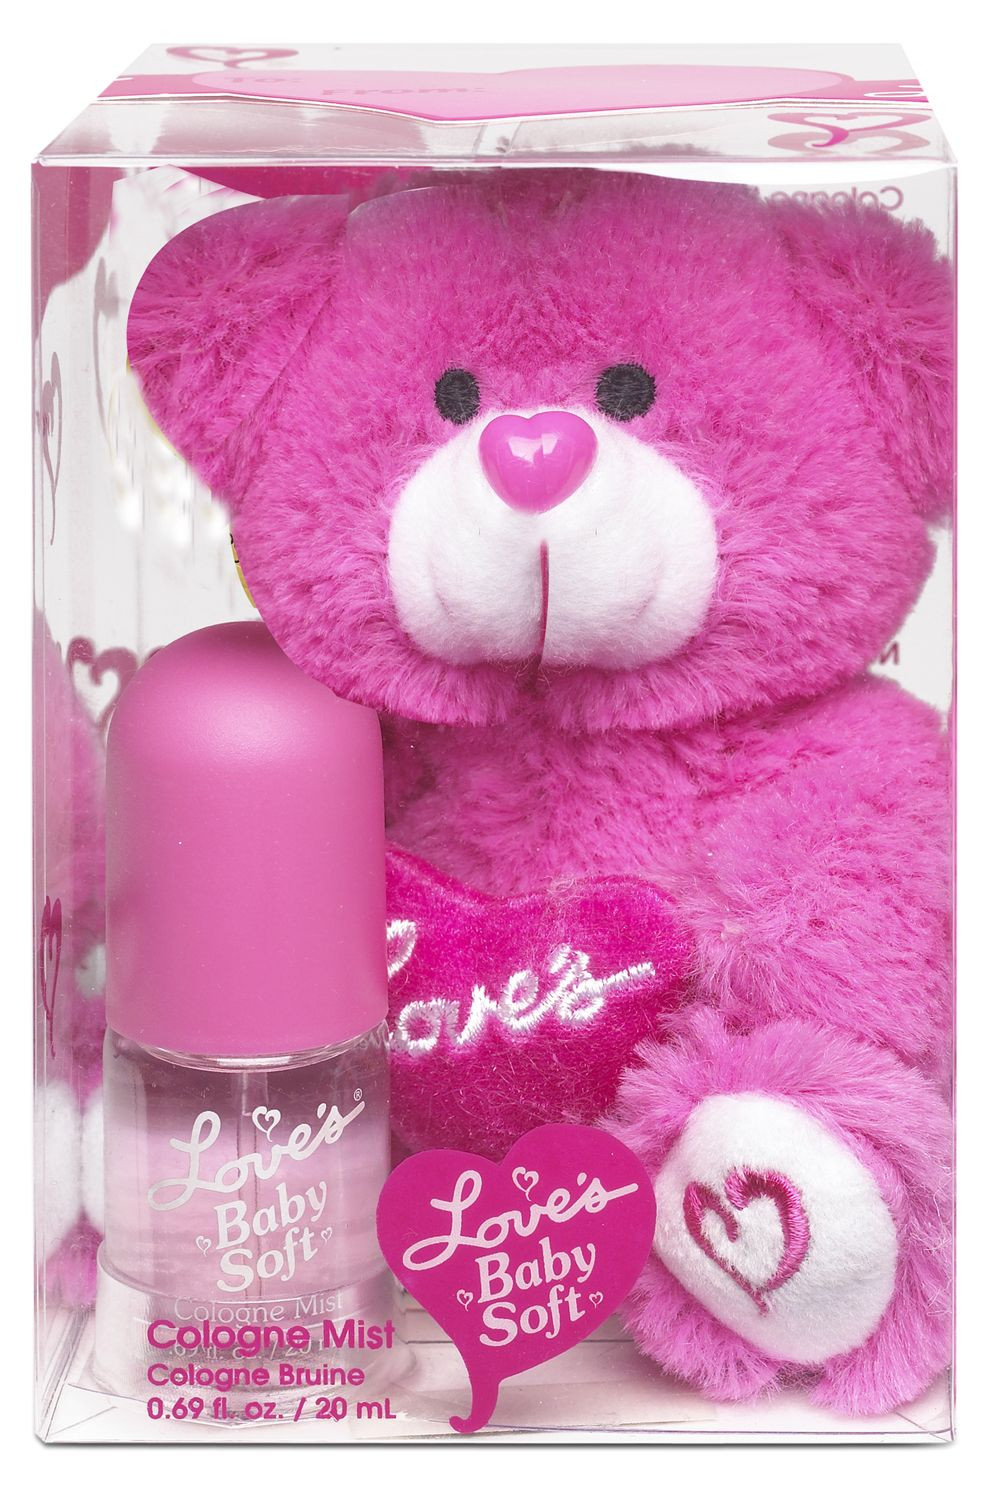 Baby Soft Perfume Gift Sets
 Love s Baby Soft Fragrance Gift Set with Bear